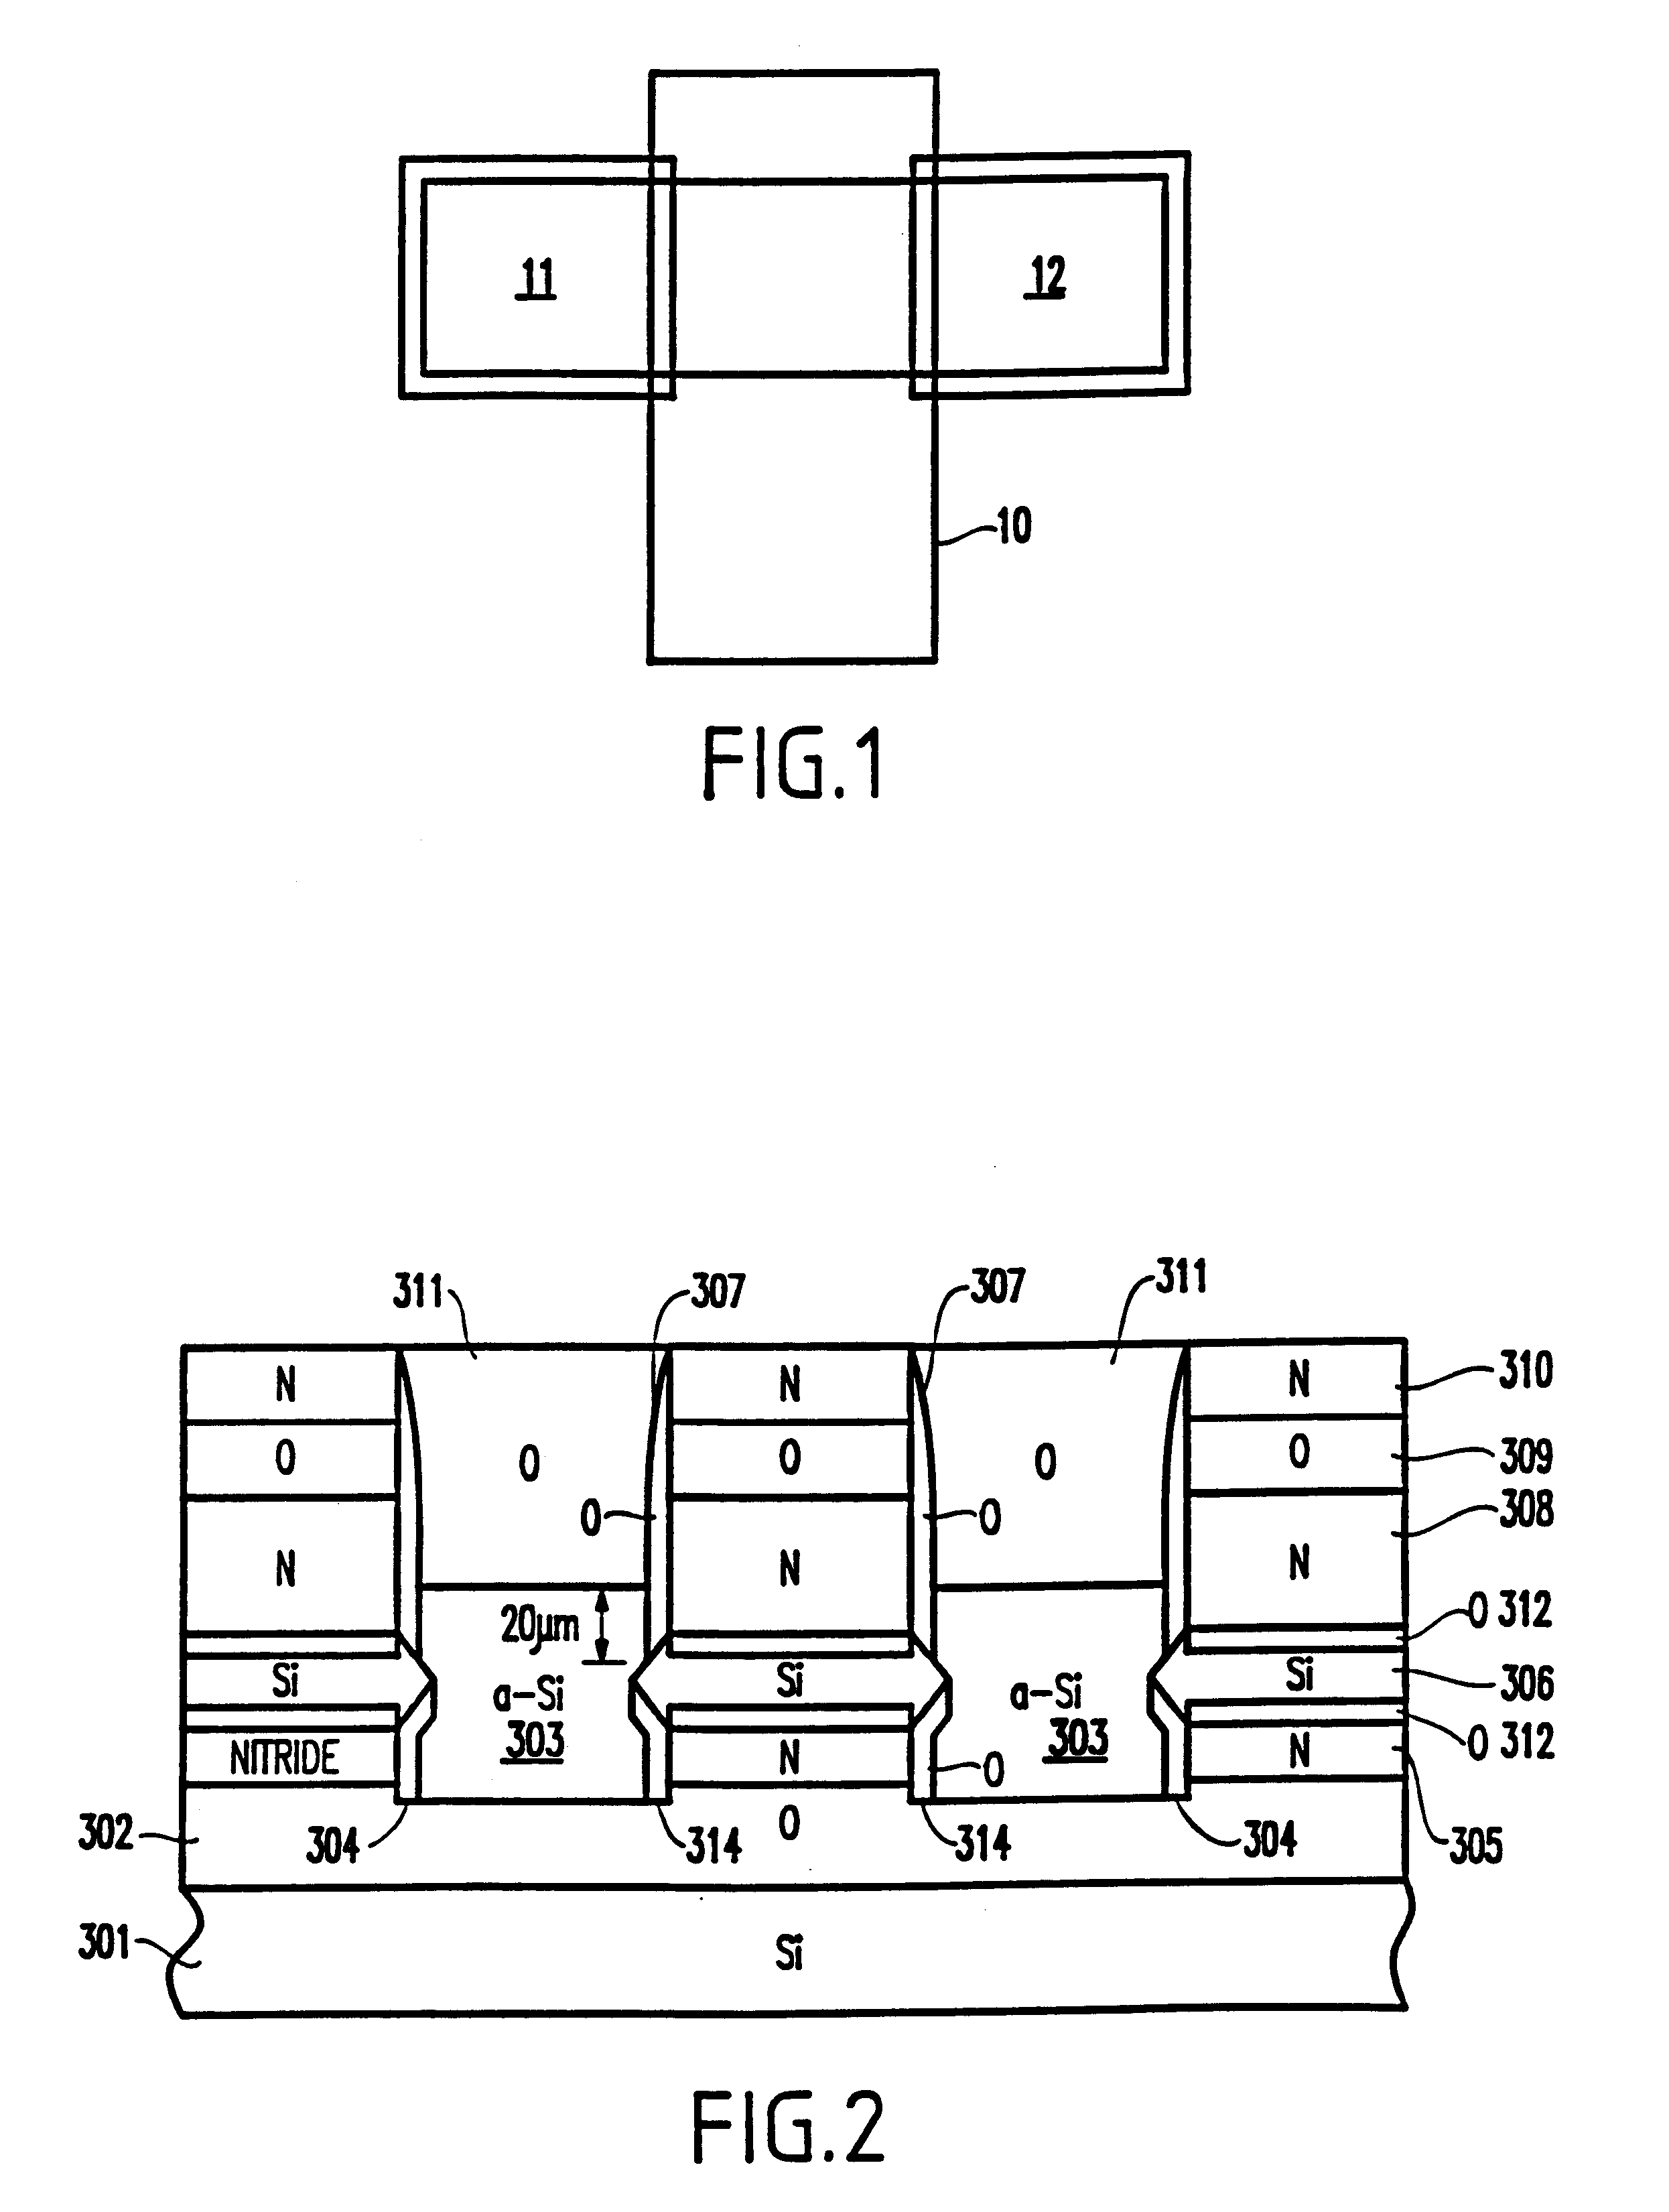 Double-gate FET with planarized surfaces and self-aligned silicides